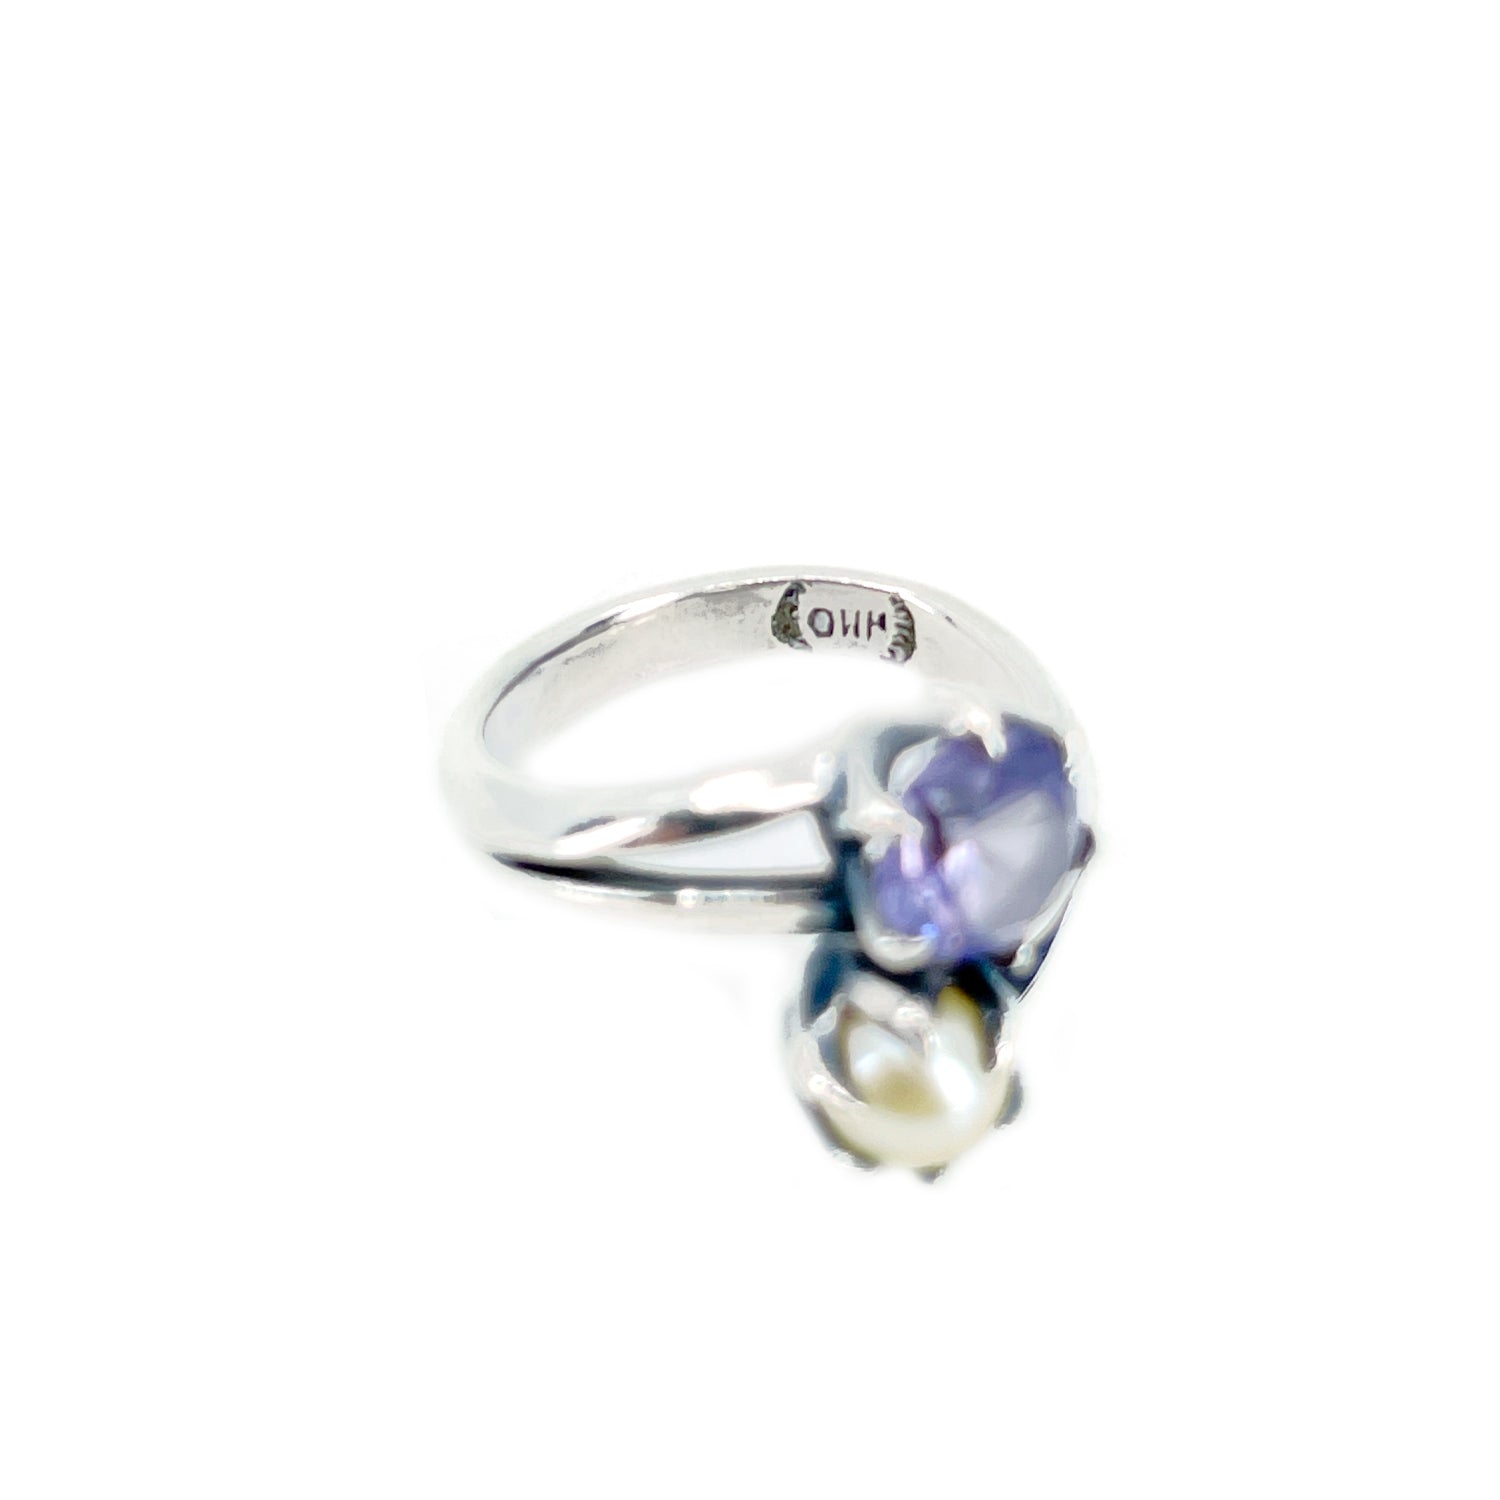 Gothic Bypass Syn Alexandrite Japanese Saltwater Akoya Cultured Pearl Ring- Sterling Silver Sz 6 1/2